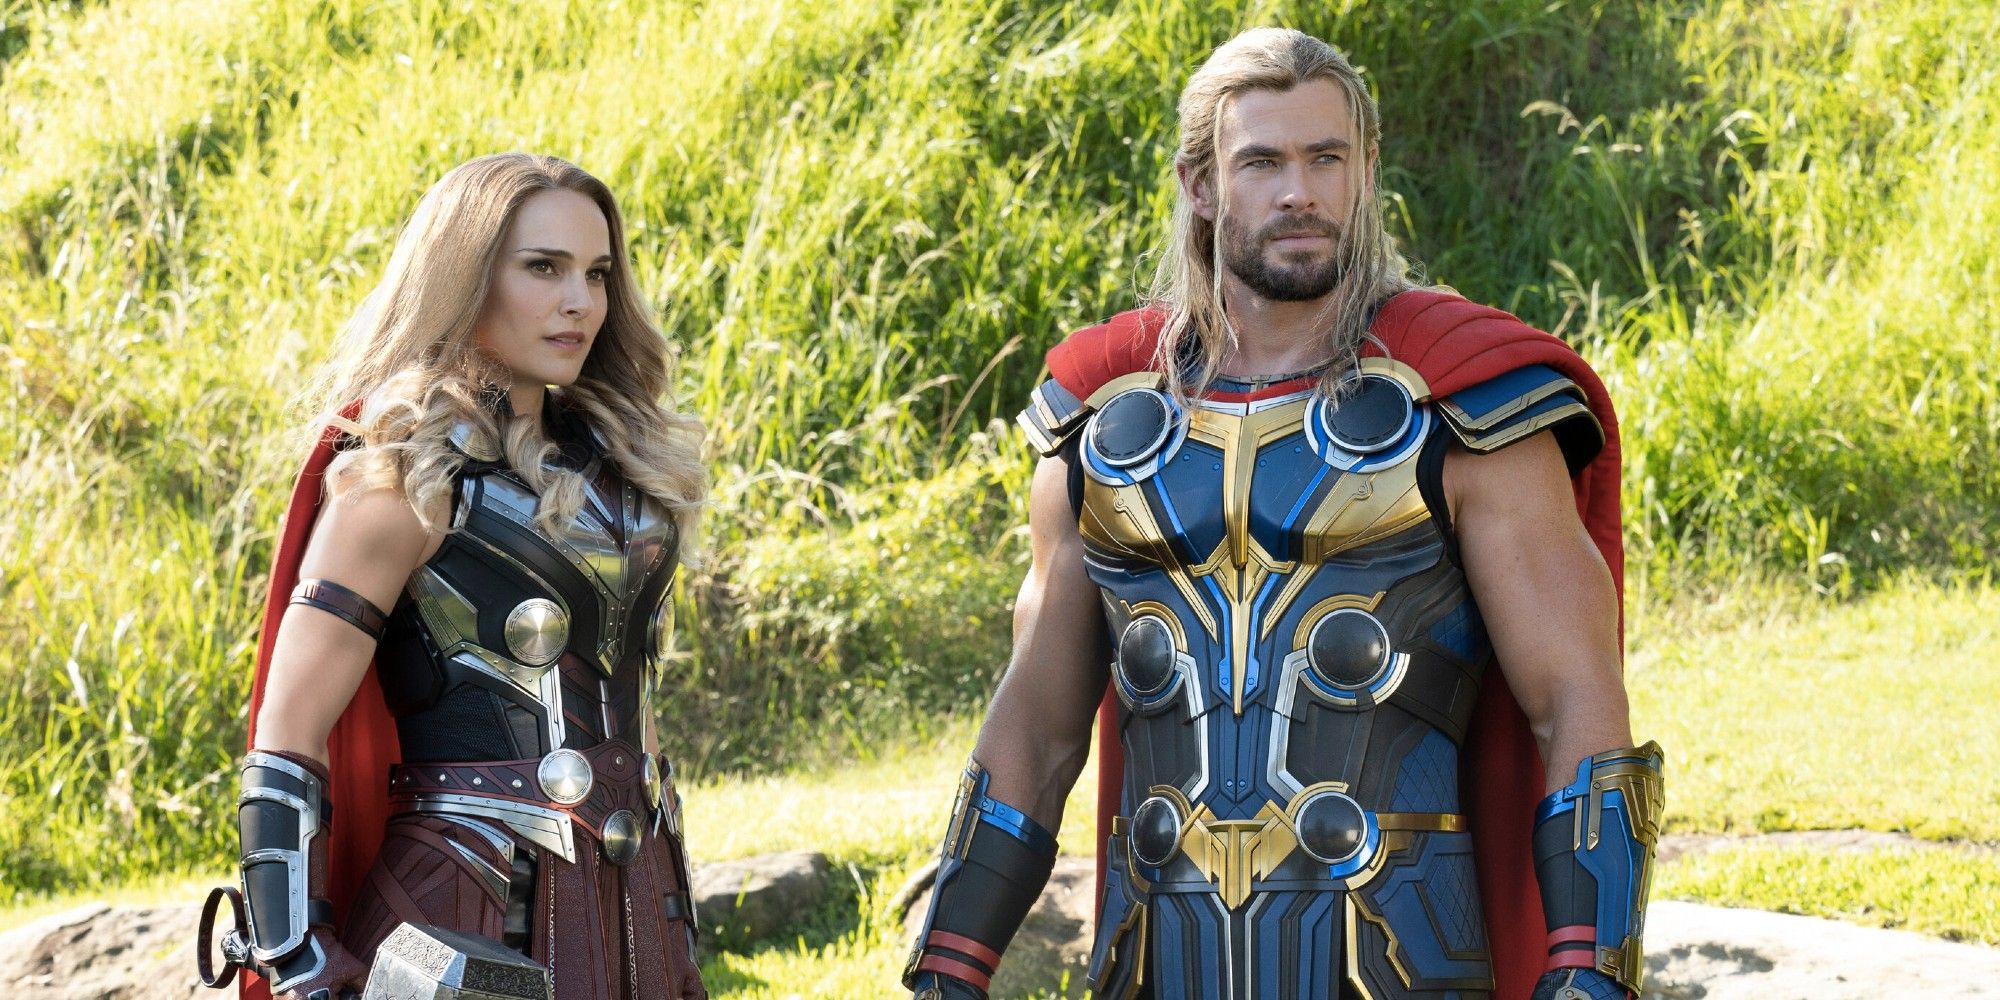 Natalie Portman and Chris Hemsworth as Jane Foster and Thor Odinson in 